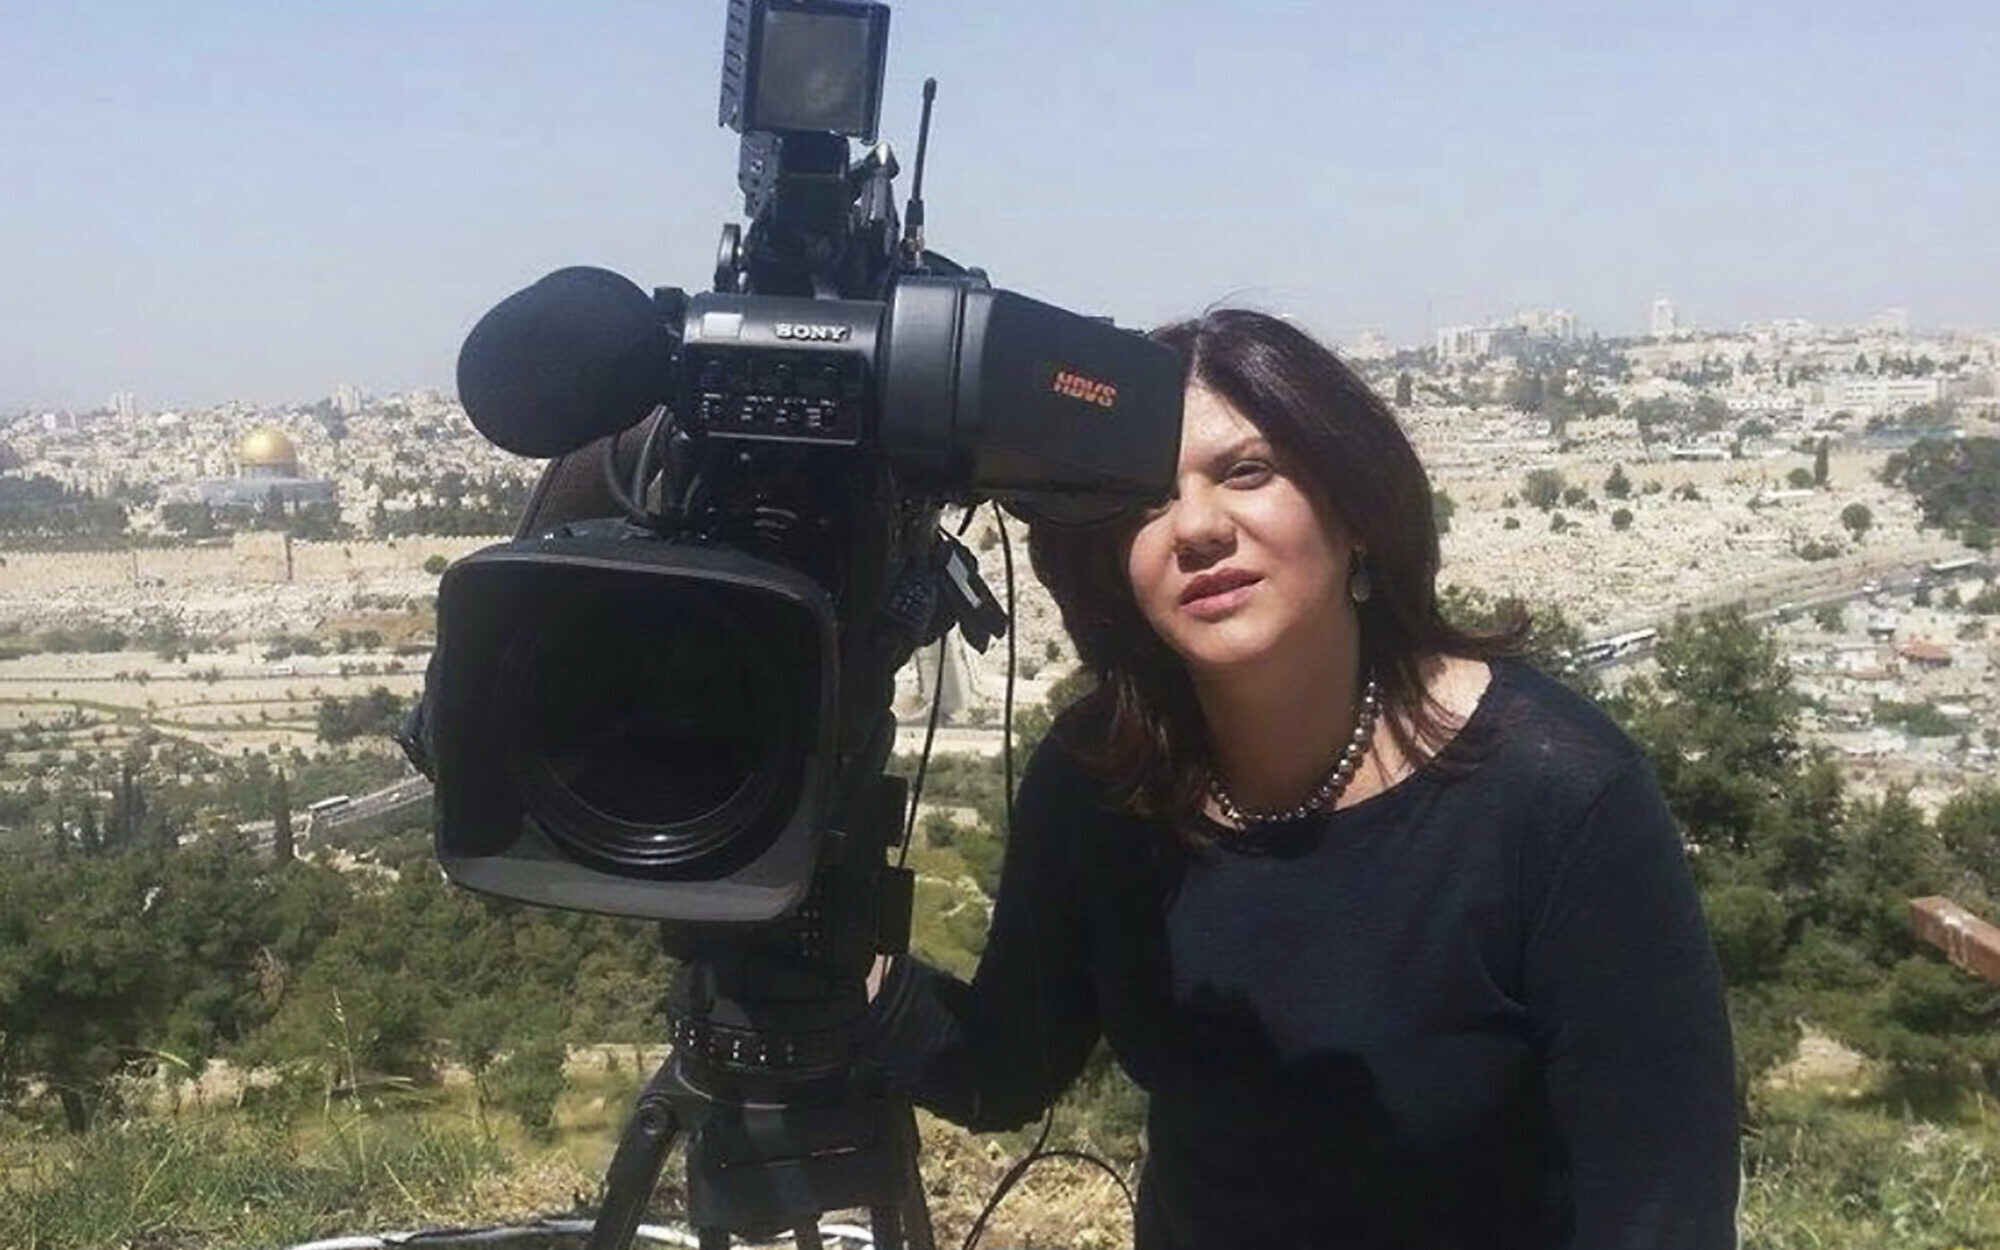 Shireen Abu Akleh remembered as one of Arab world's leading journalists |  The Times of Israel